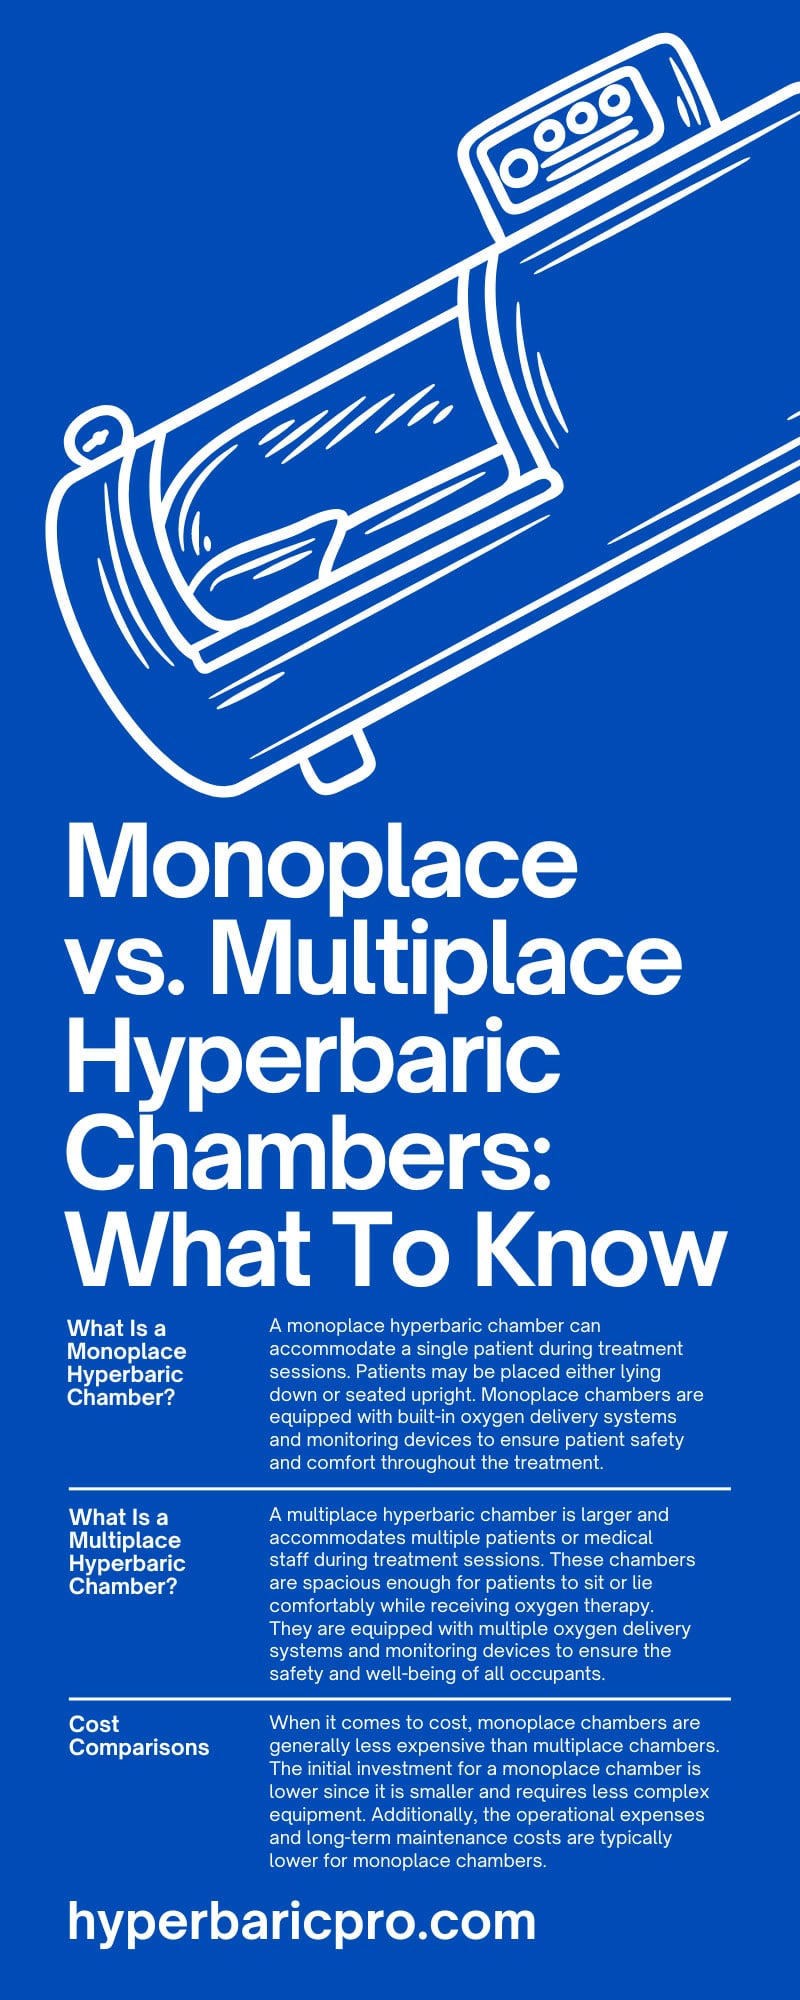 Monoplace vs. Multiplace Hyperbaric Chambers: What To Know